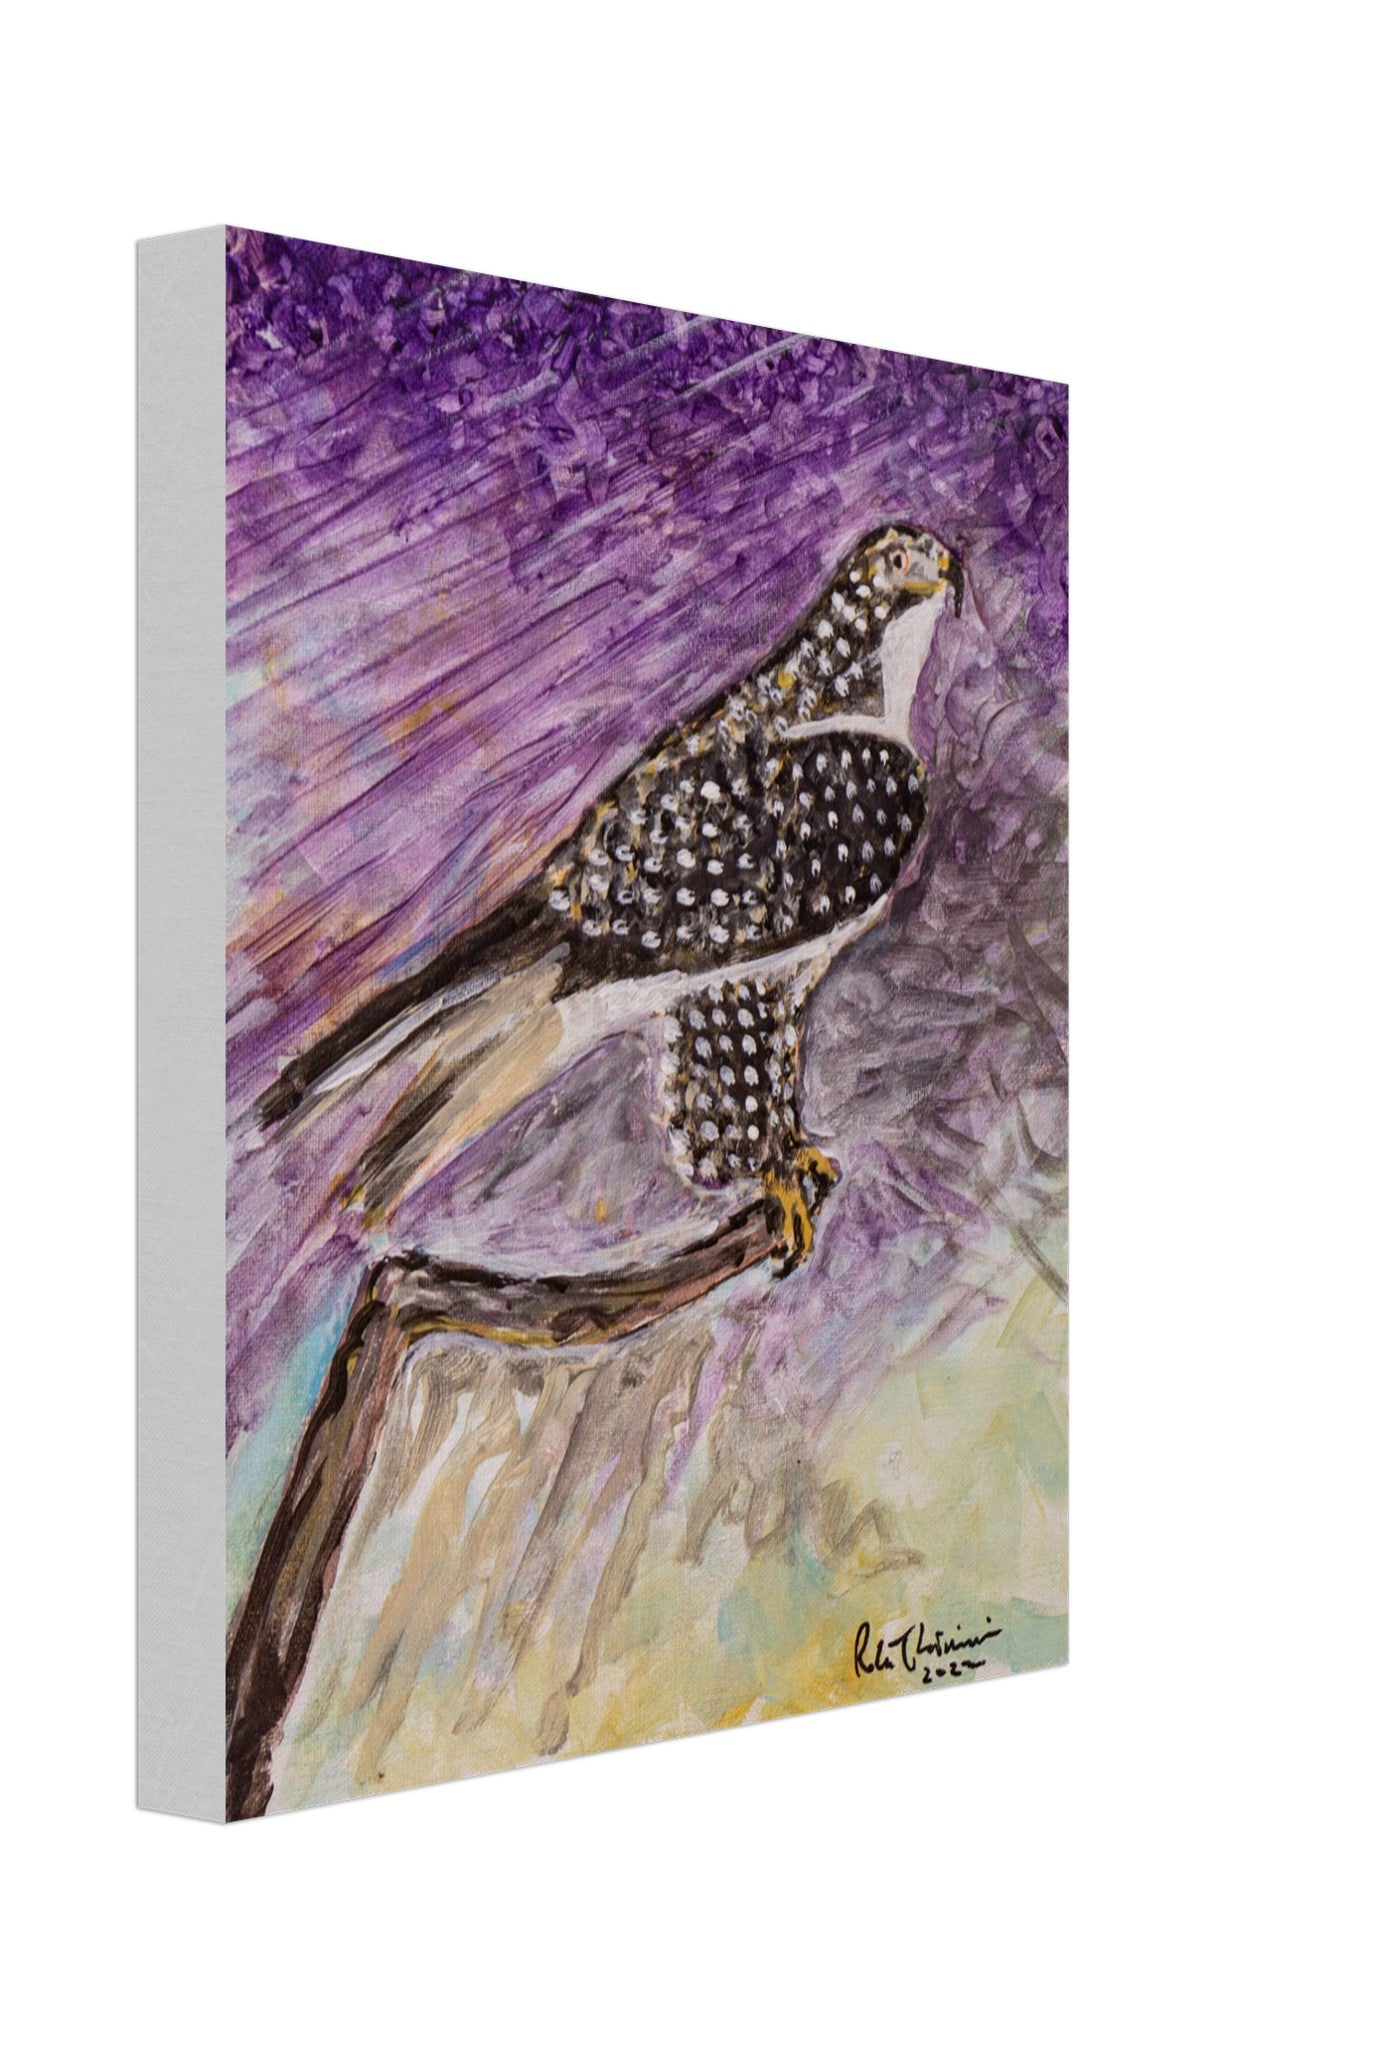 Red-Tailed Hawk - Canvas